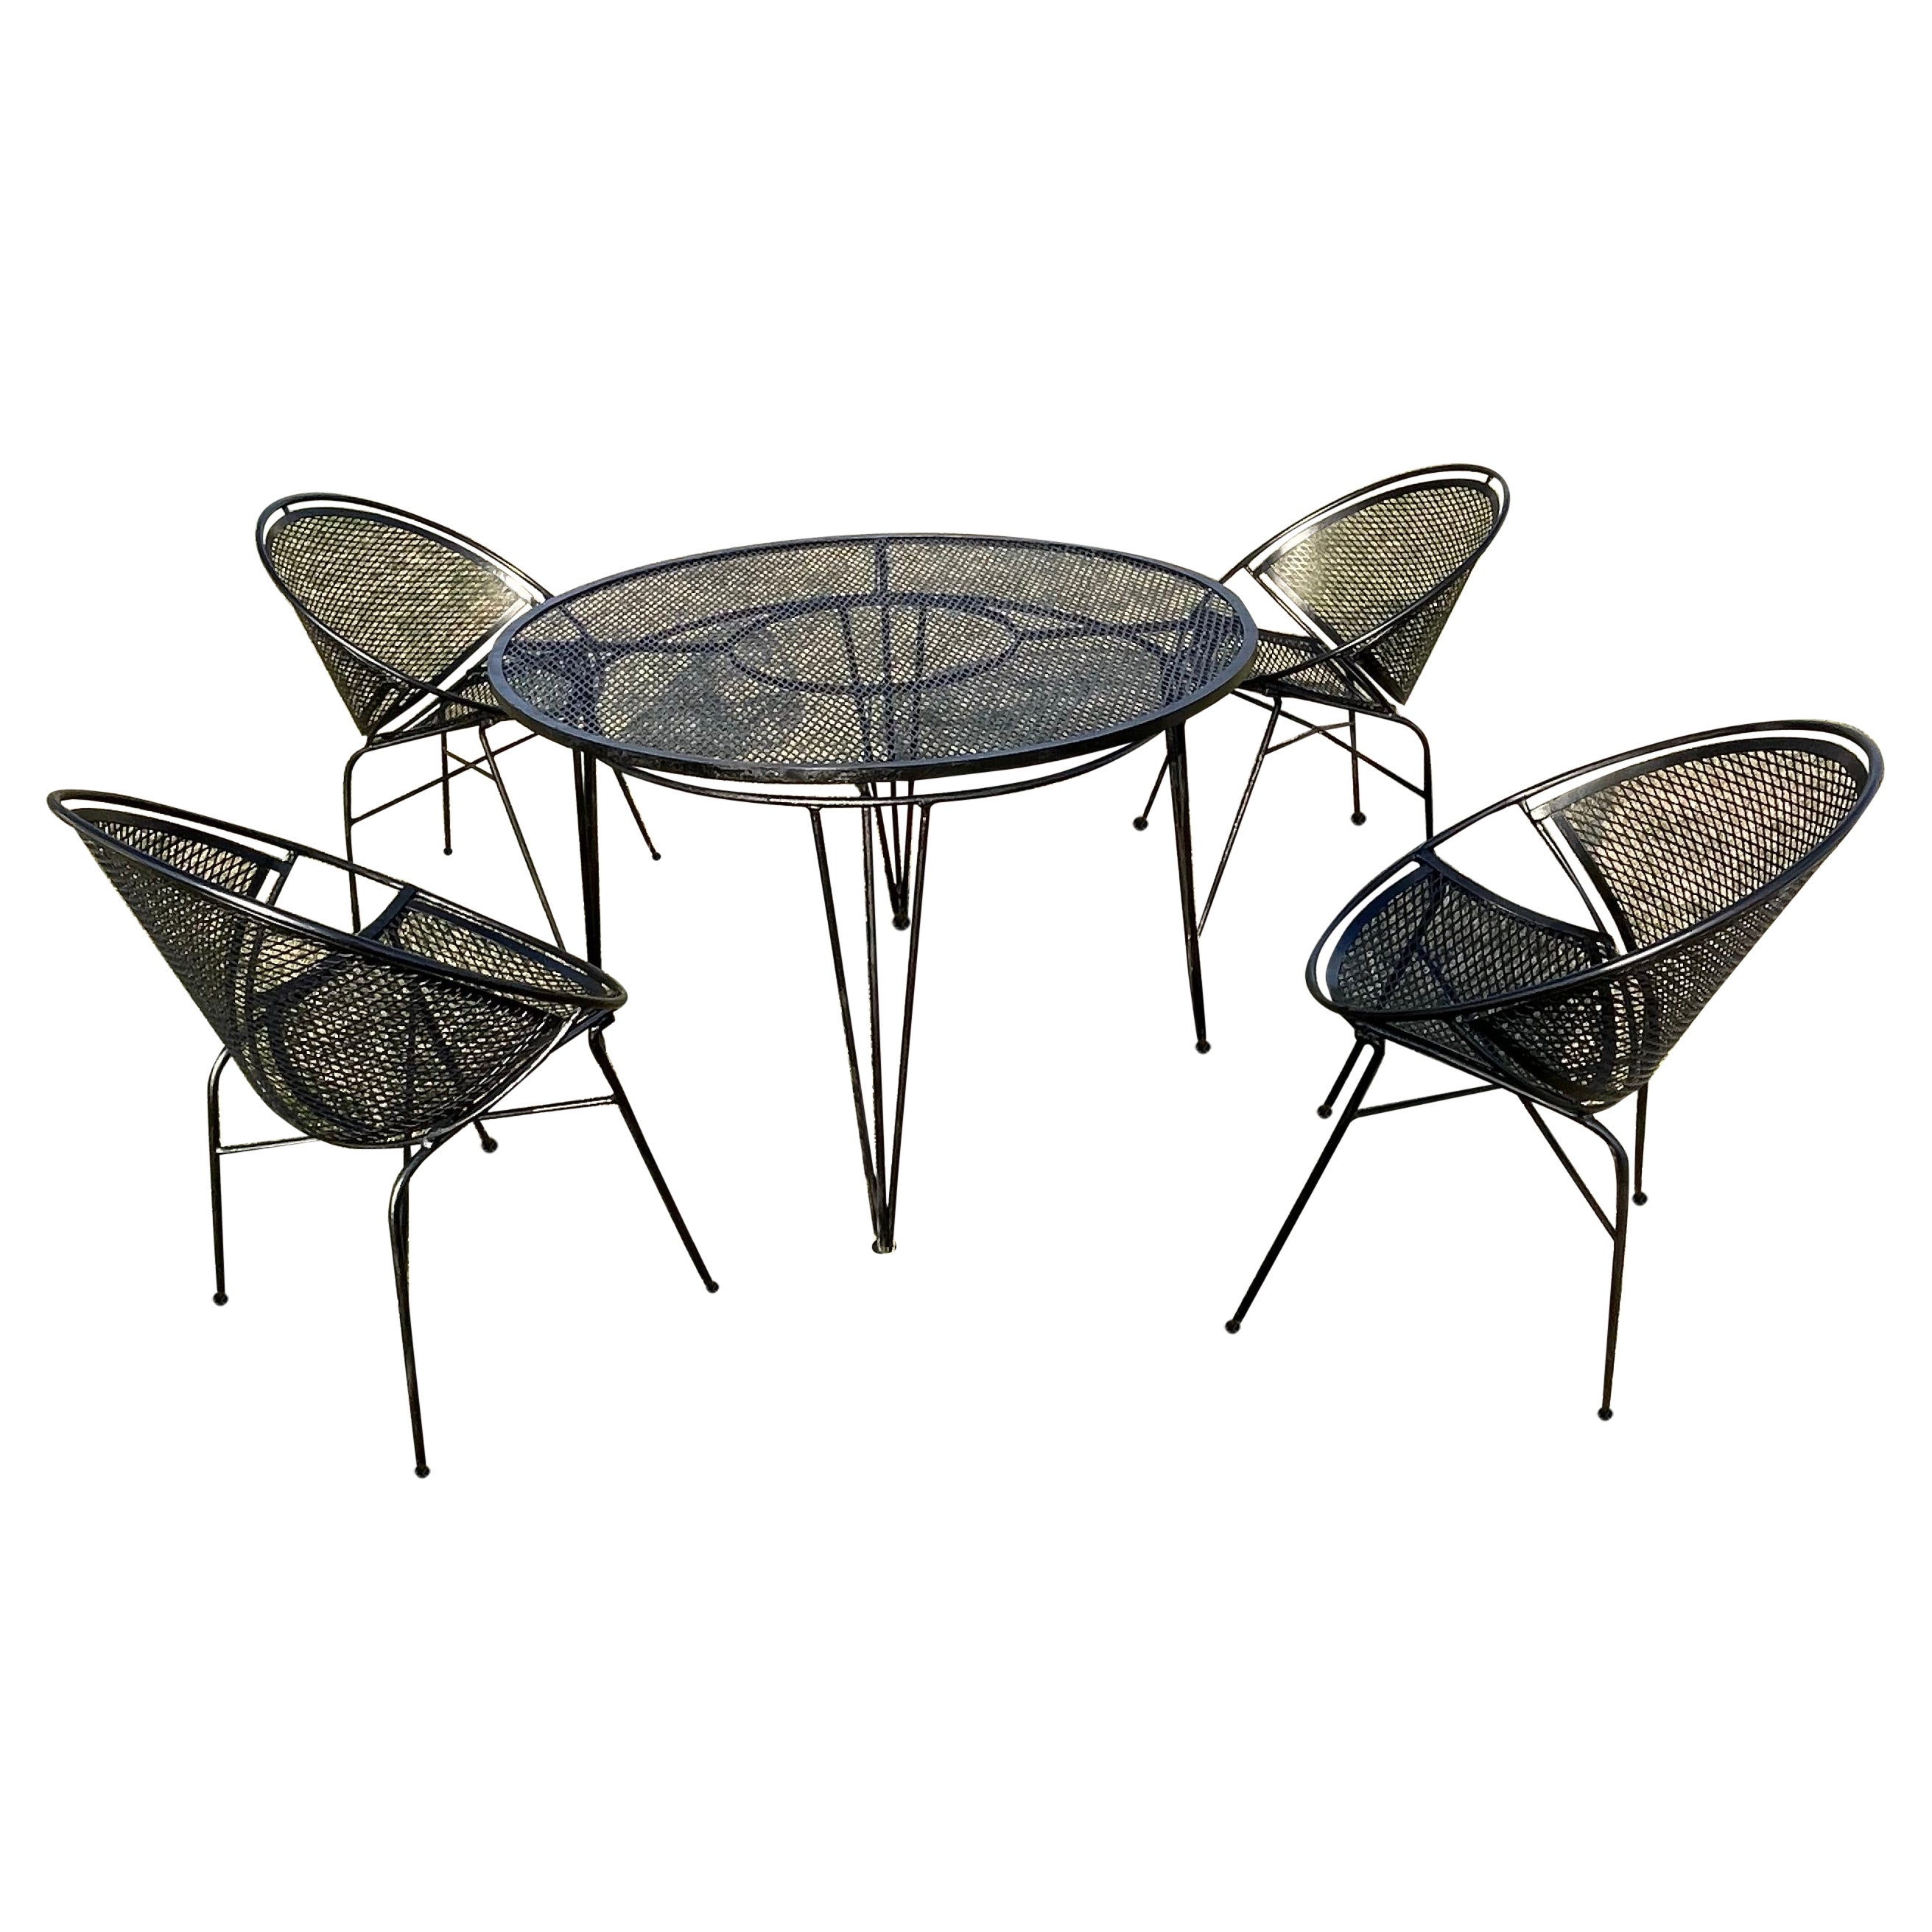 What is the best material for outdoor dining sets?